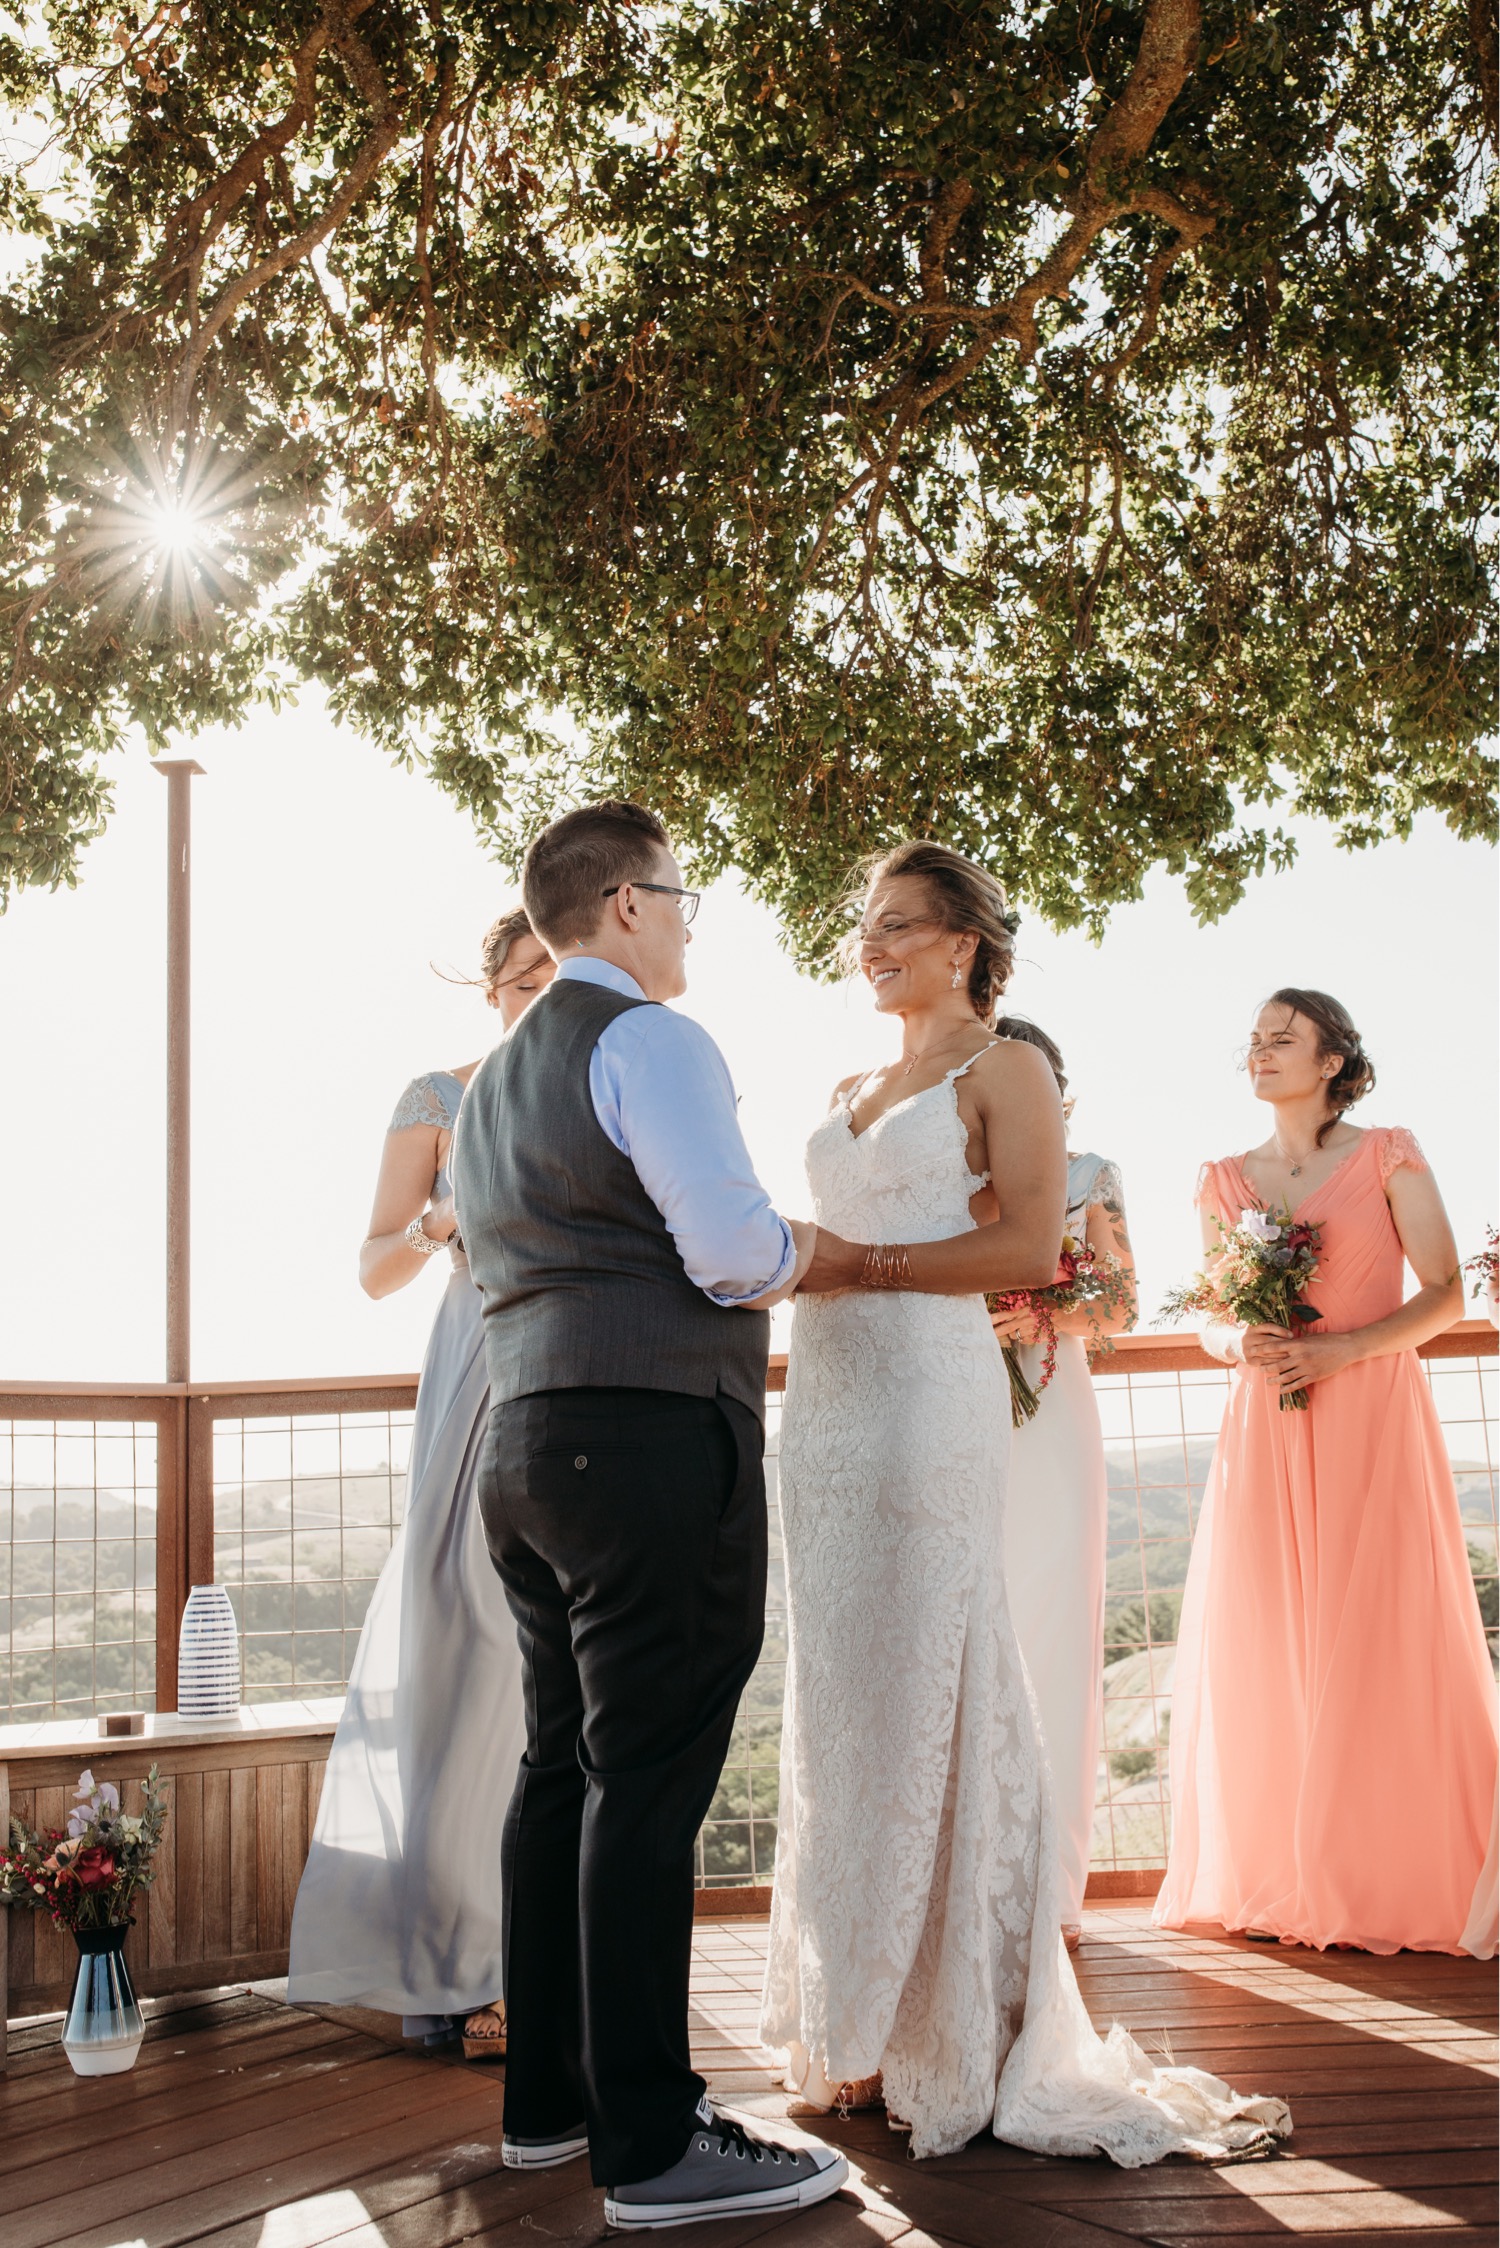 Brides exchange vows under a tree overlooking the Paso Robles vineyard during their winery wedding. Liz Koston Photography.